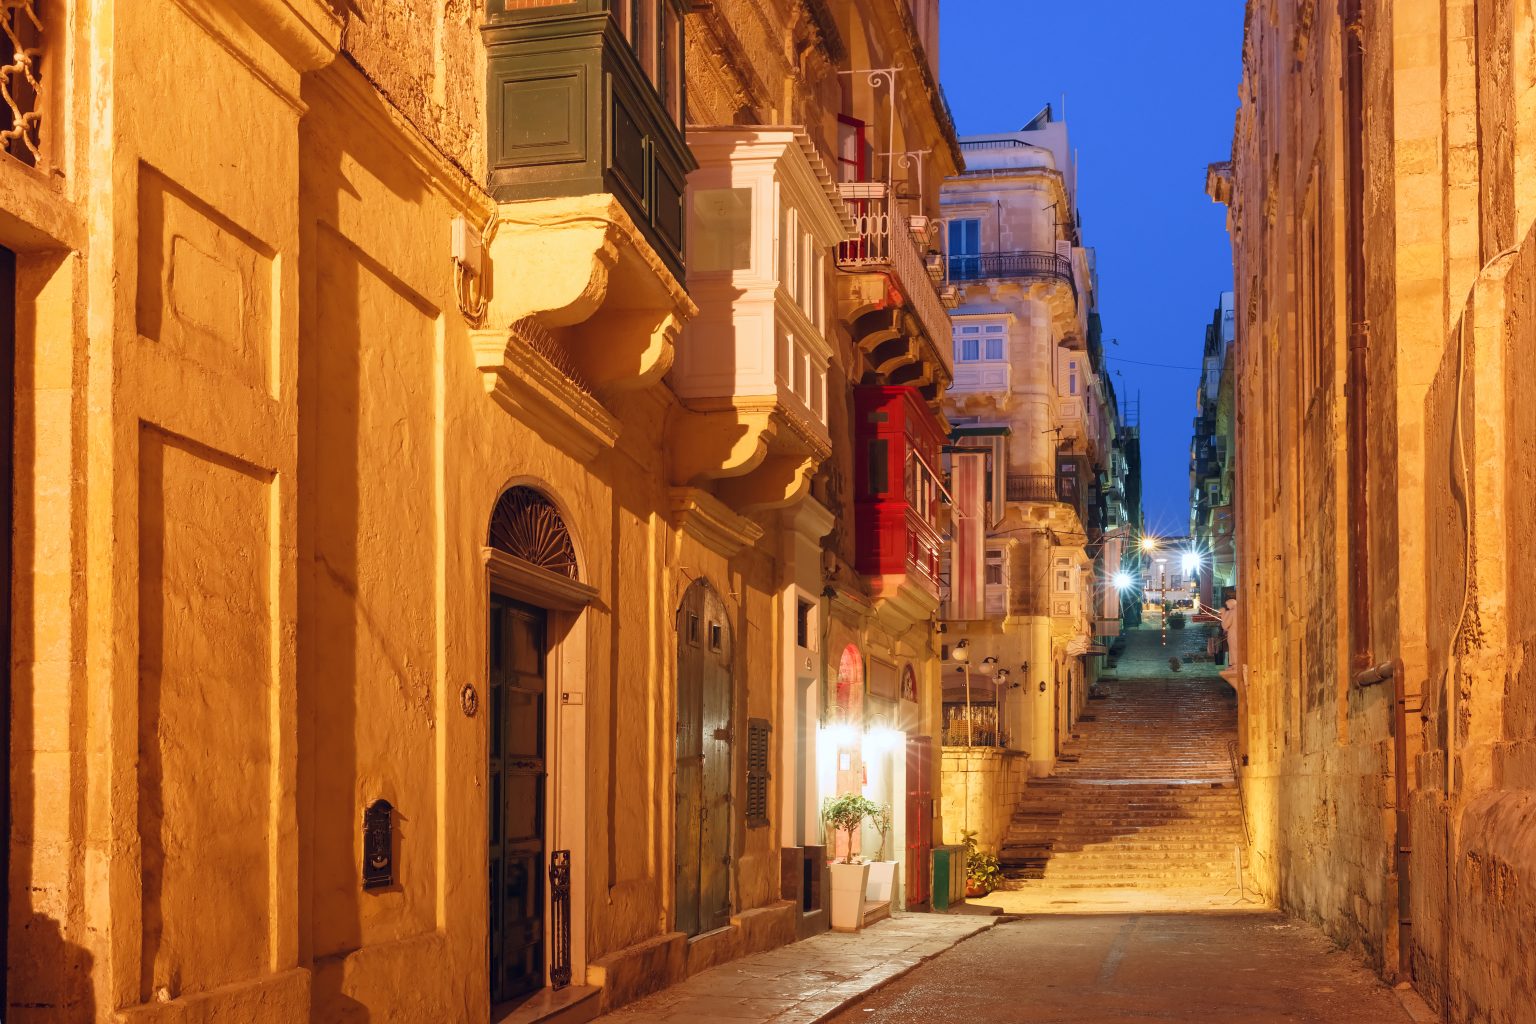 Typical Maltese medieval street at night in the center of the Old Town of Valletta, Malta